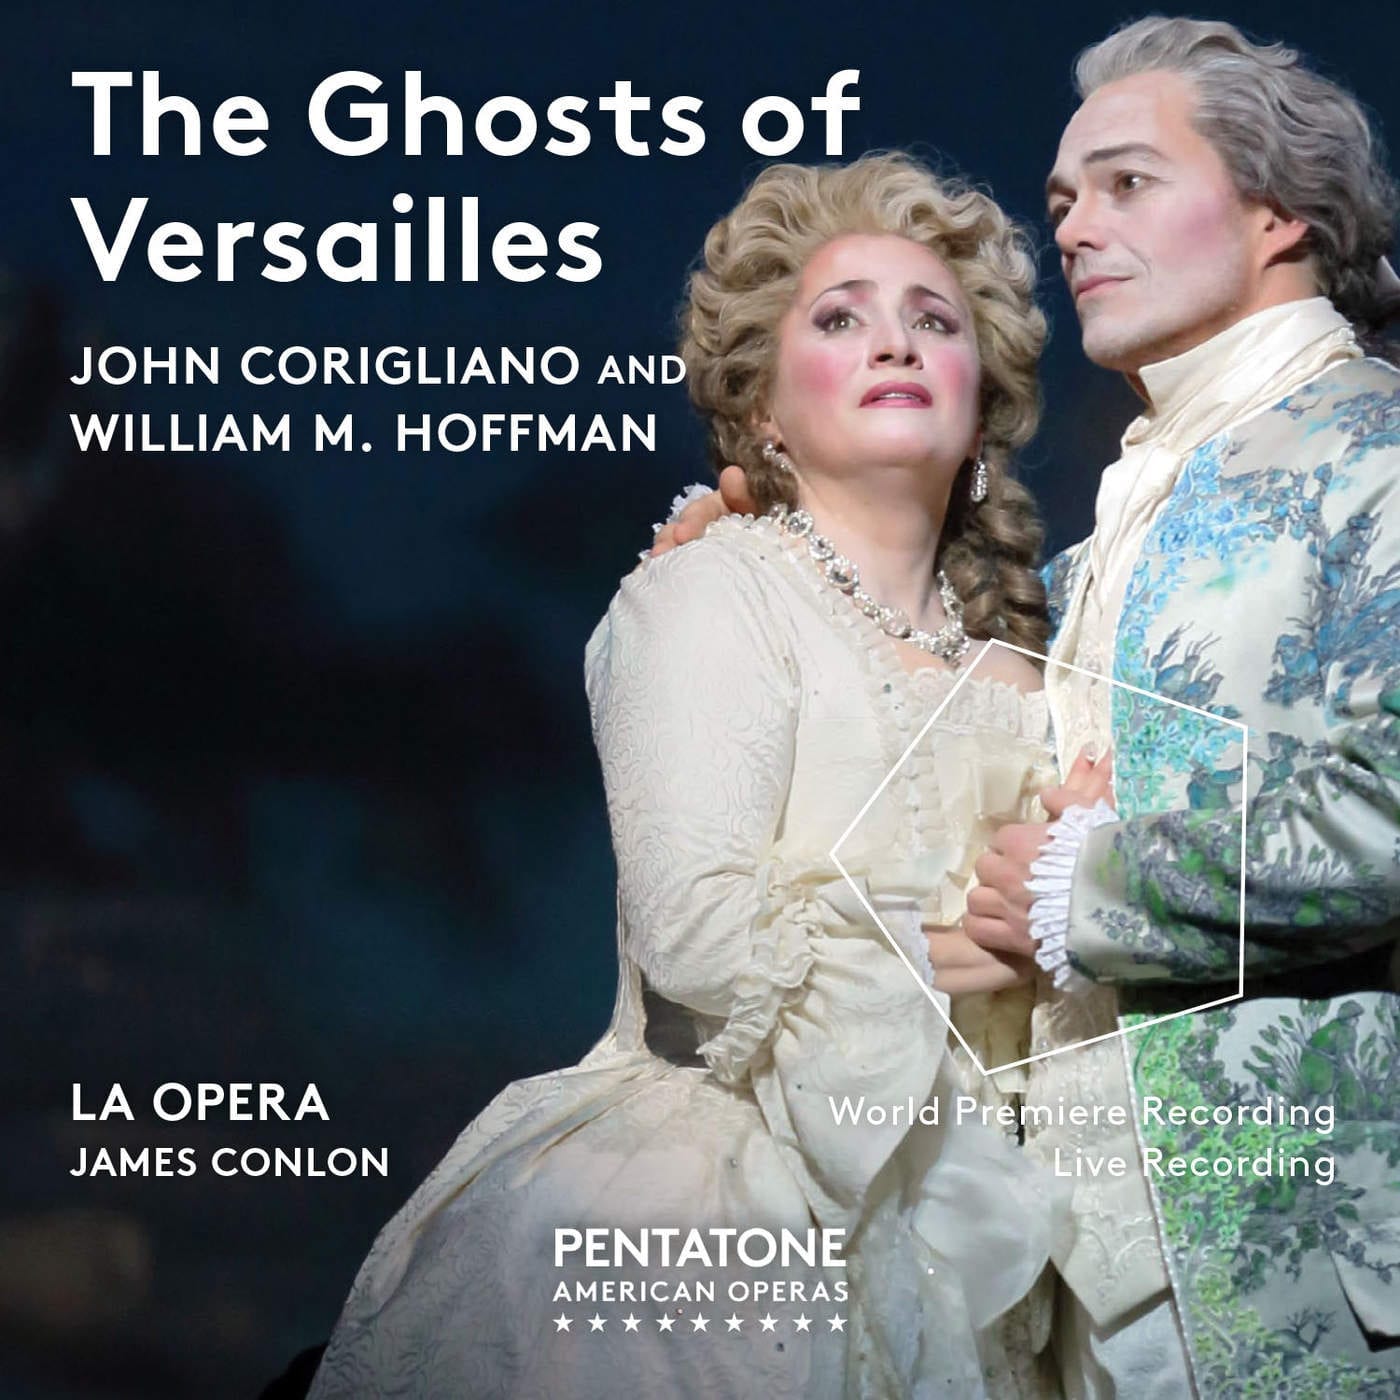 The Ghosts of Versailles, featuring Lucas Meachem